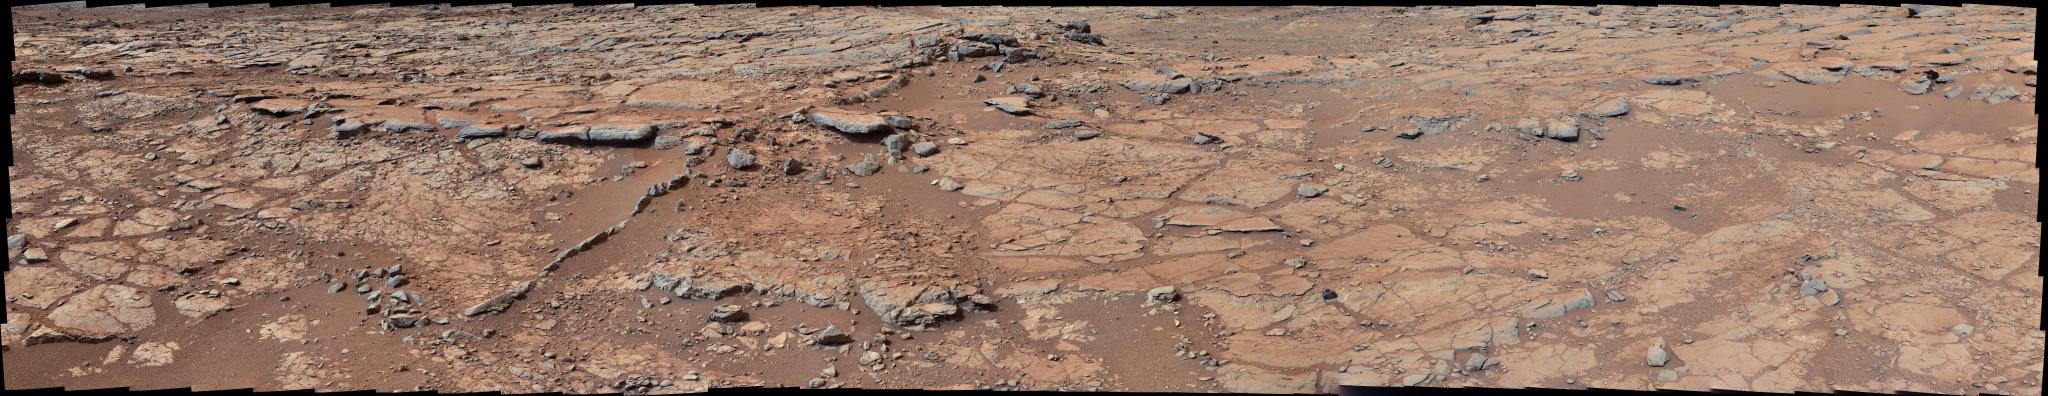 View of Yellowknife Bay on Mars from Curiosity rover